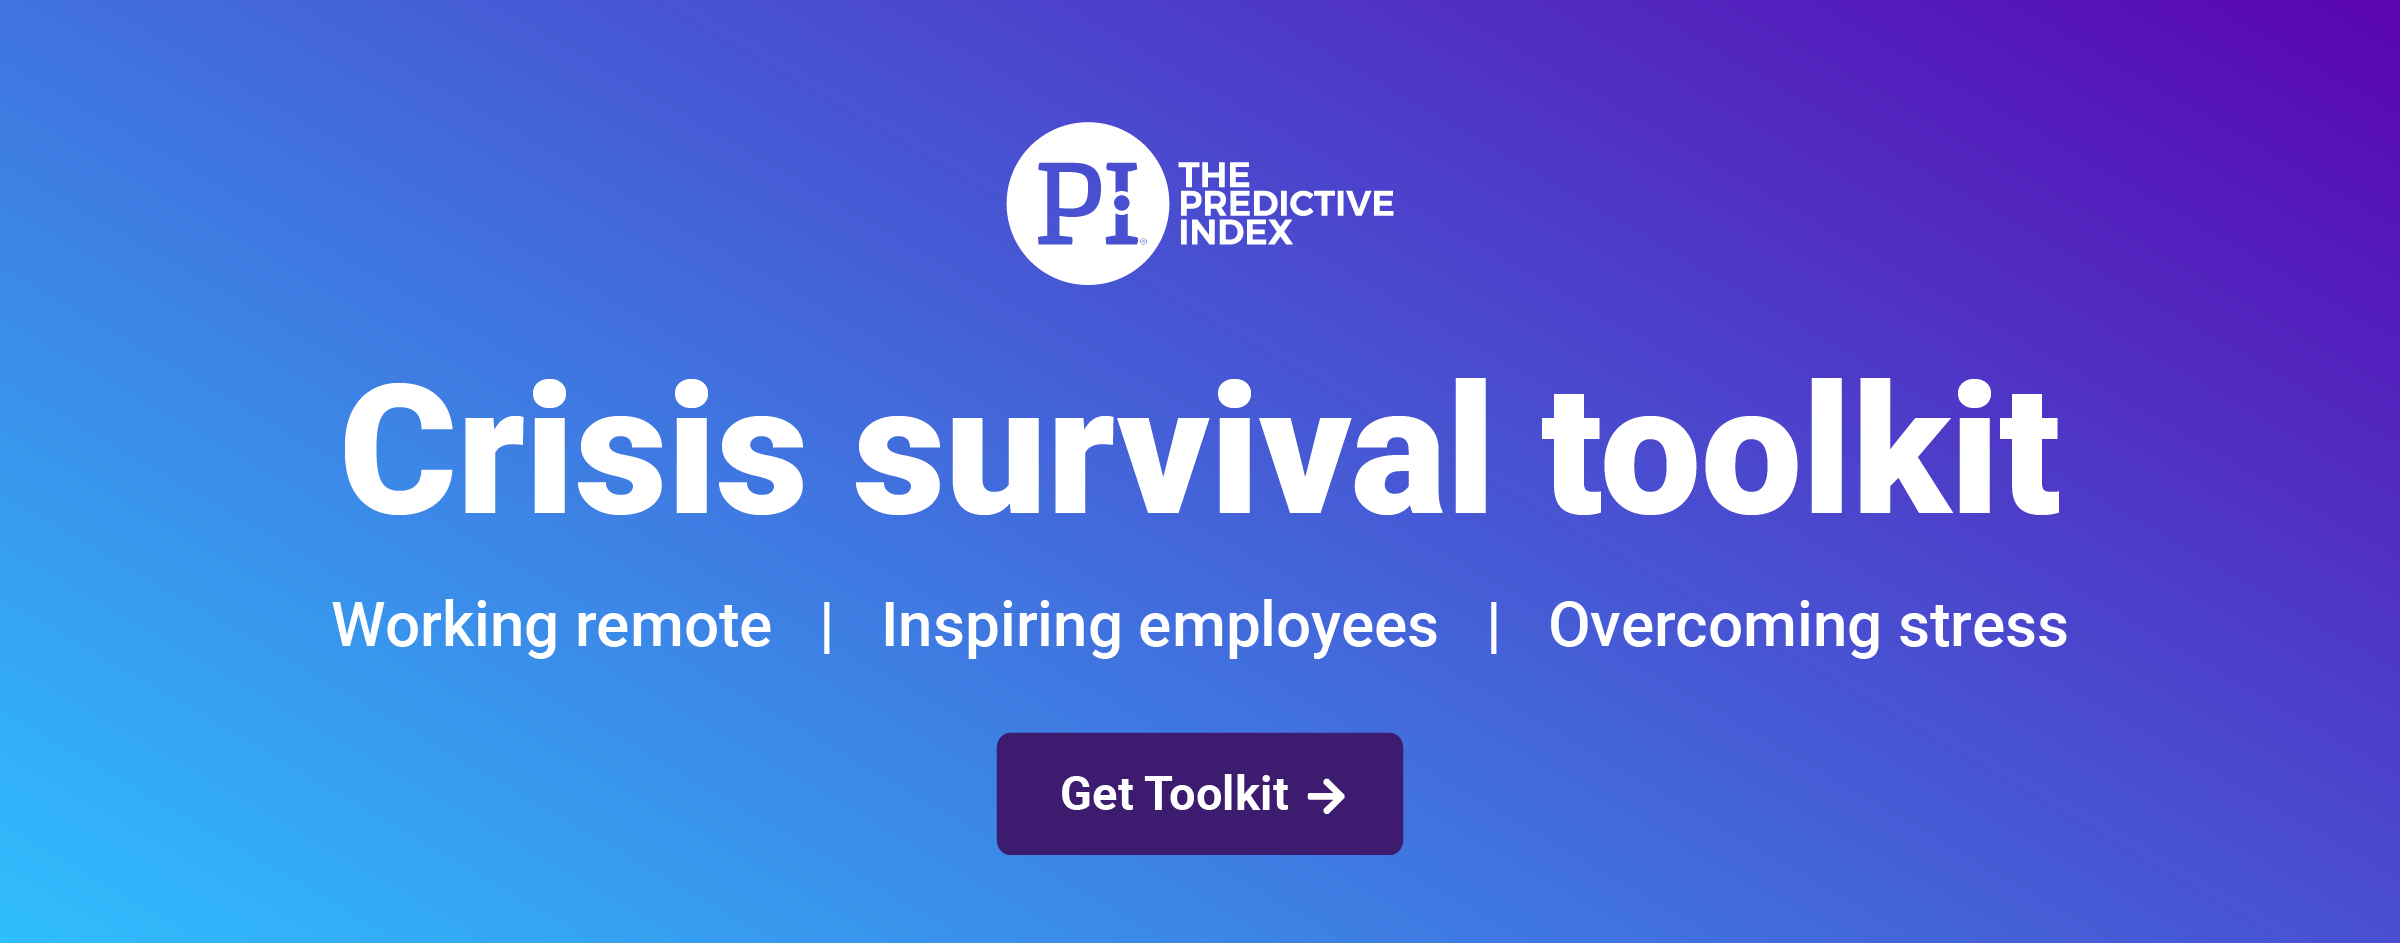 click to see the crisis survival toolkit